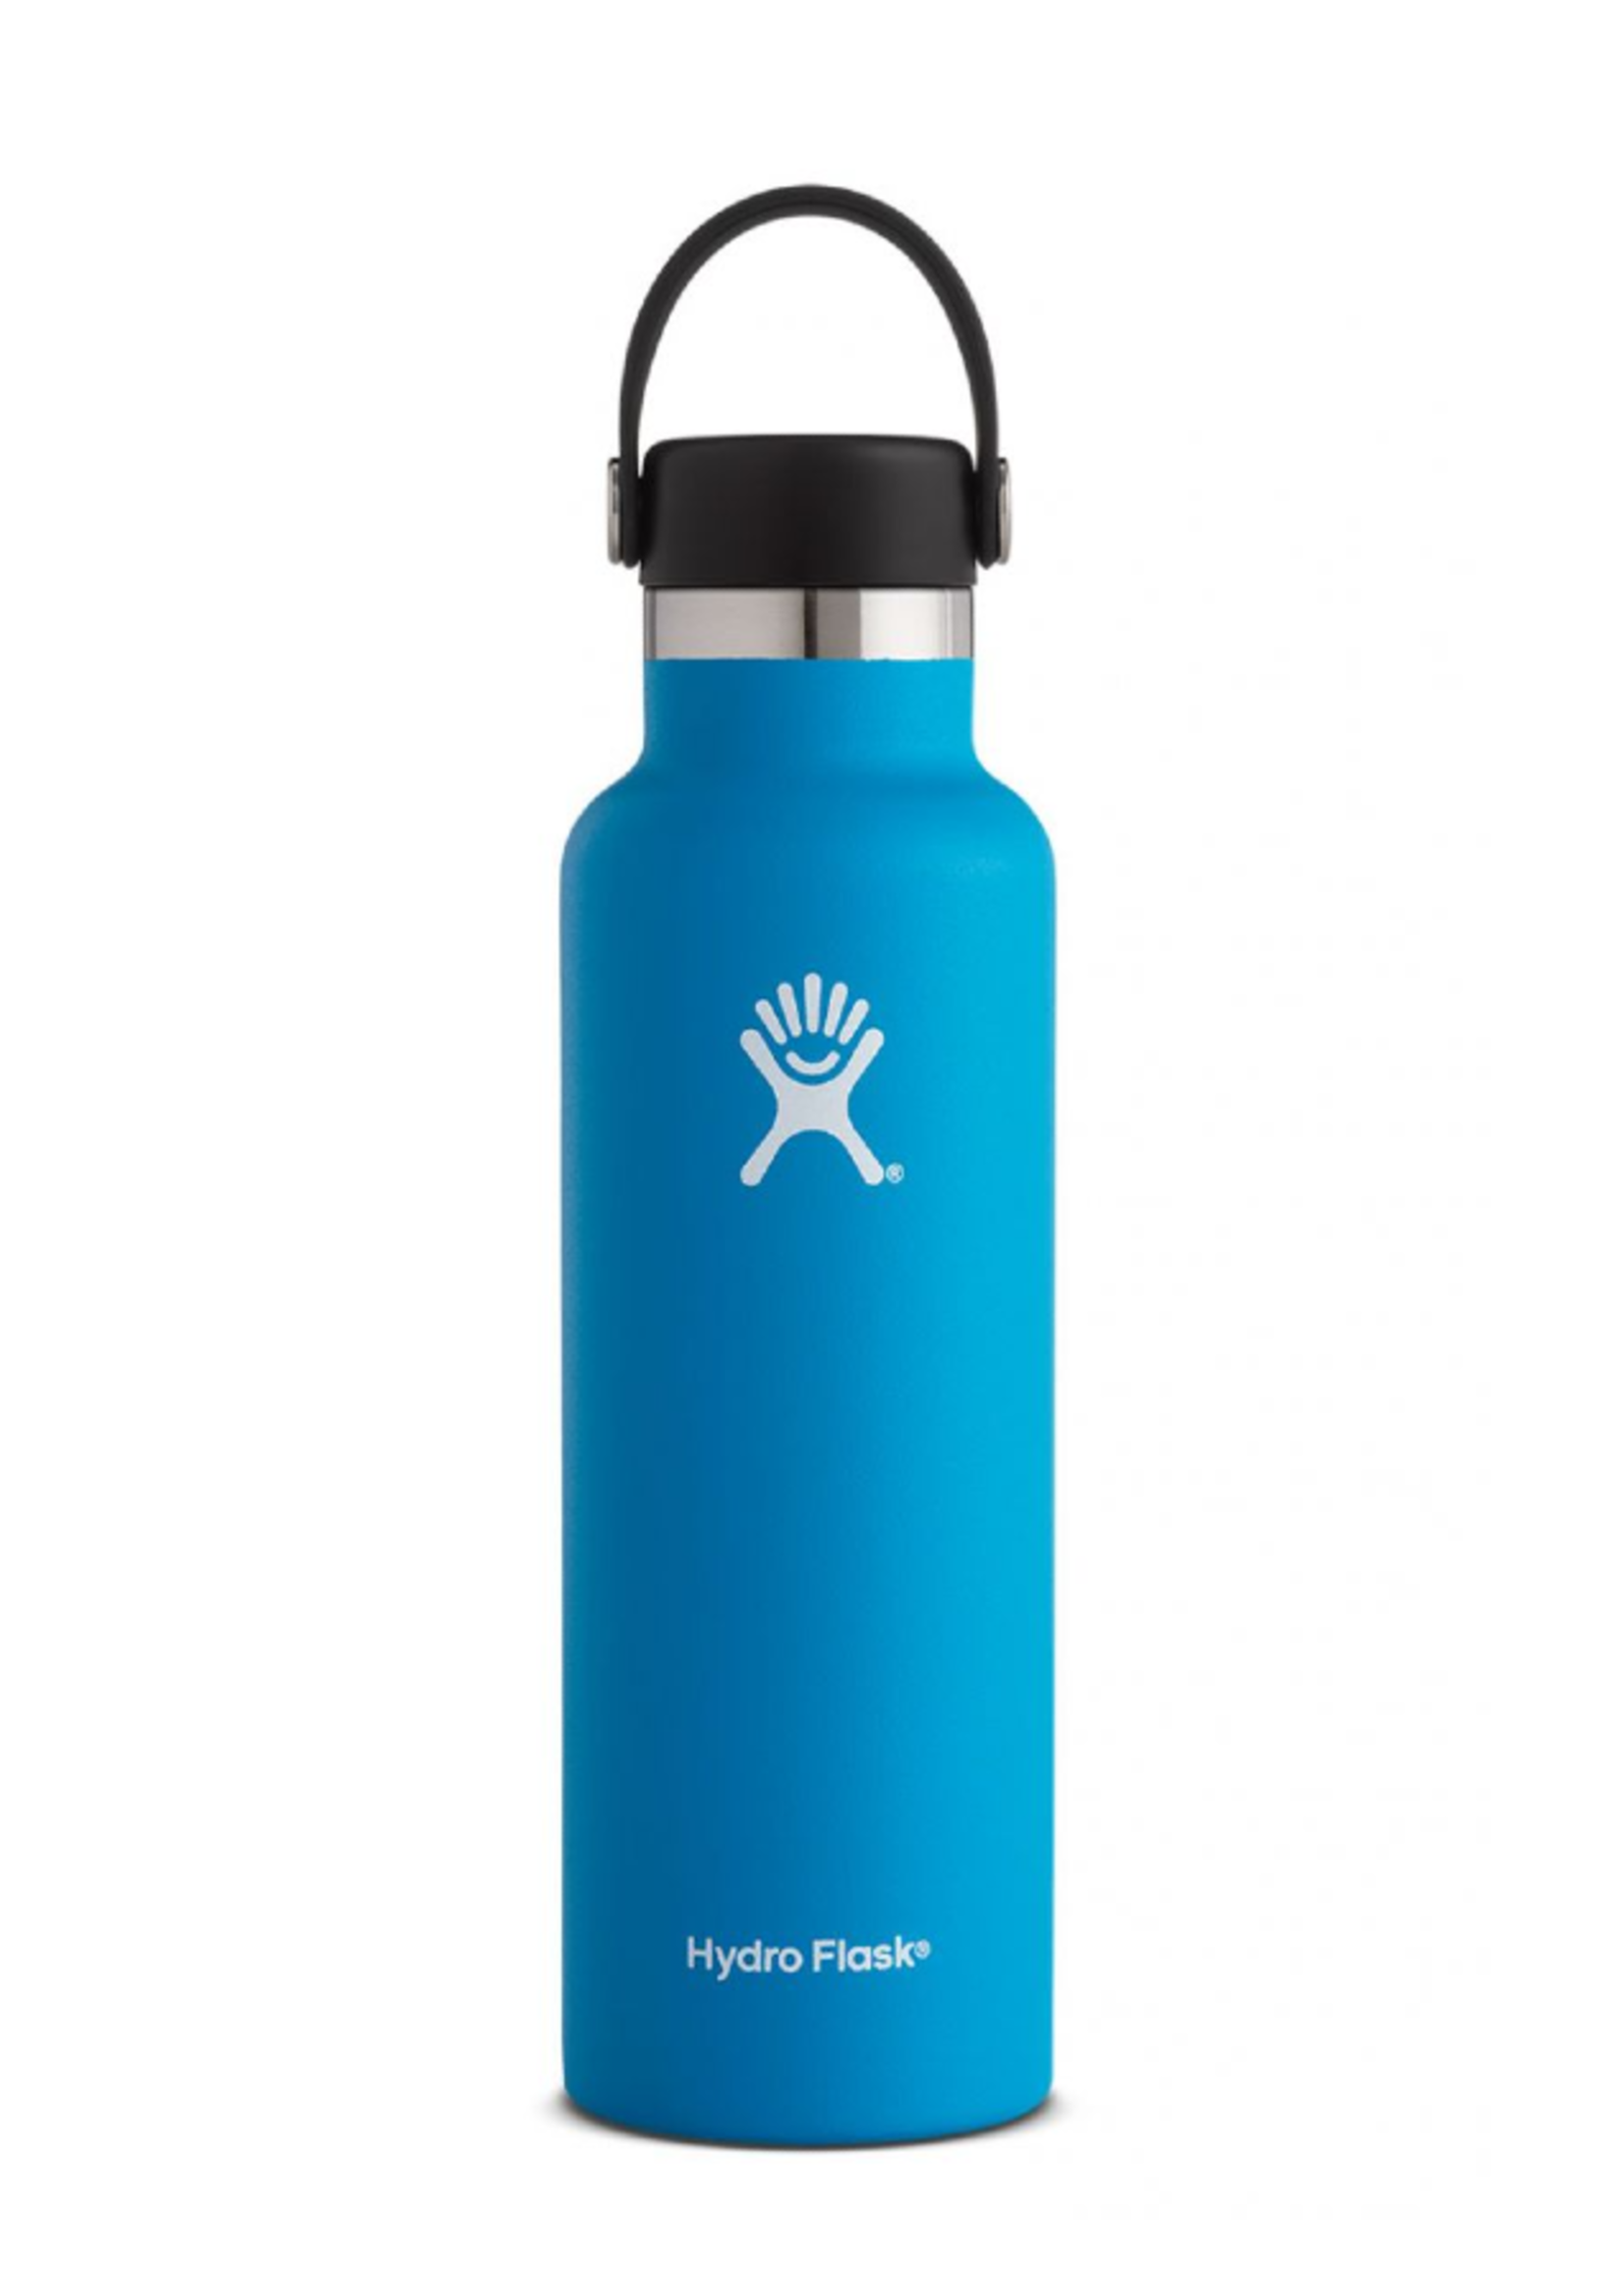 Hydro Flask 21 oz Standard Mouth Water Bottle - North Central